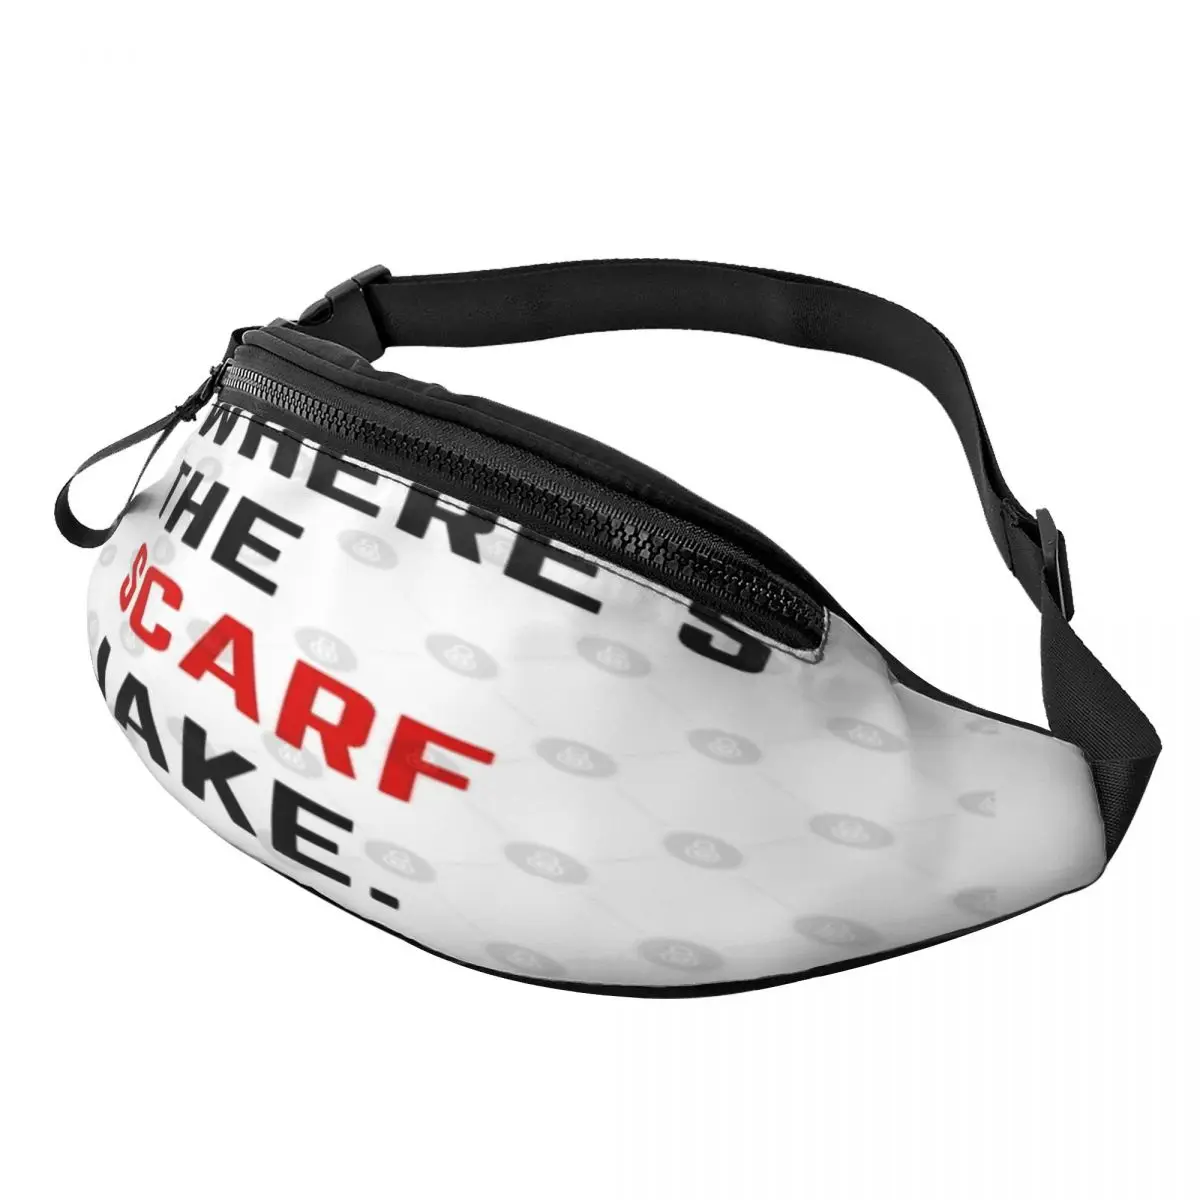 

Where's The Scarf Jake Fanny Pack,Waist Bag Fashionable With Zip Out Nice gift Customizable